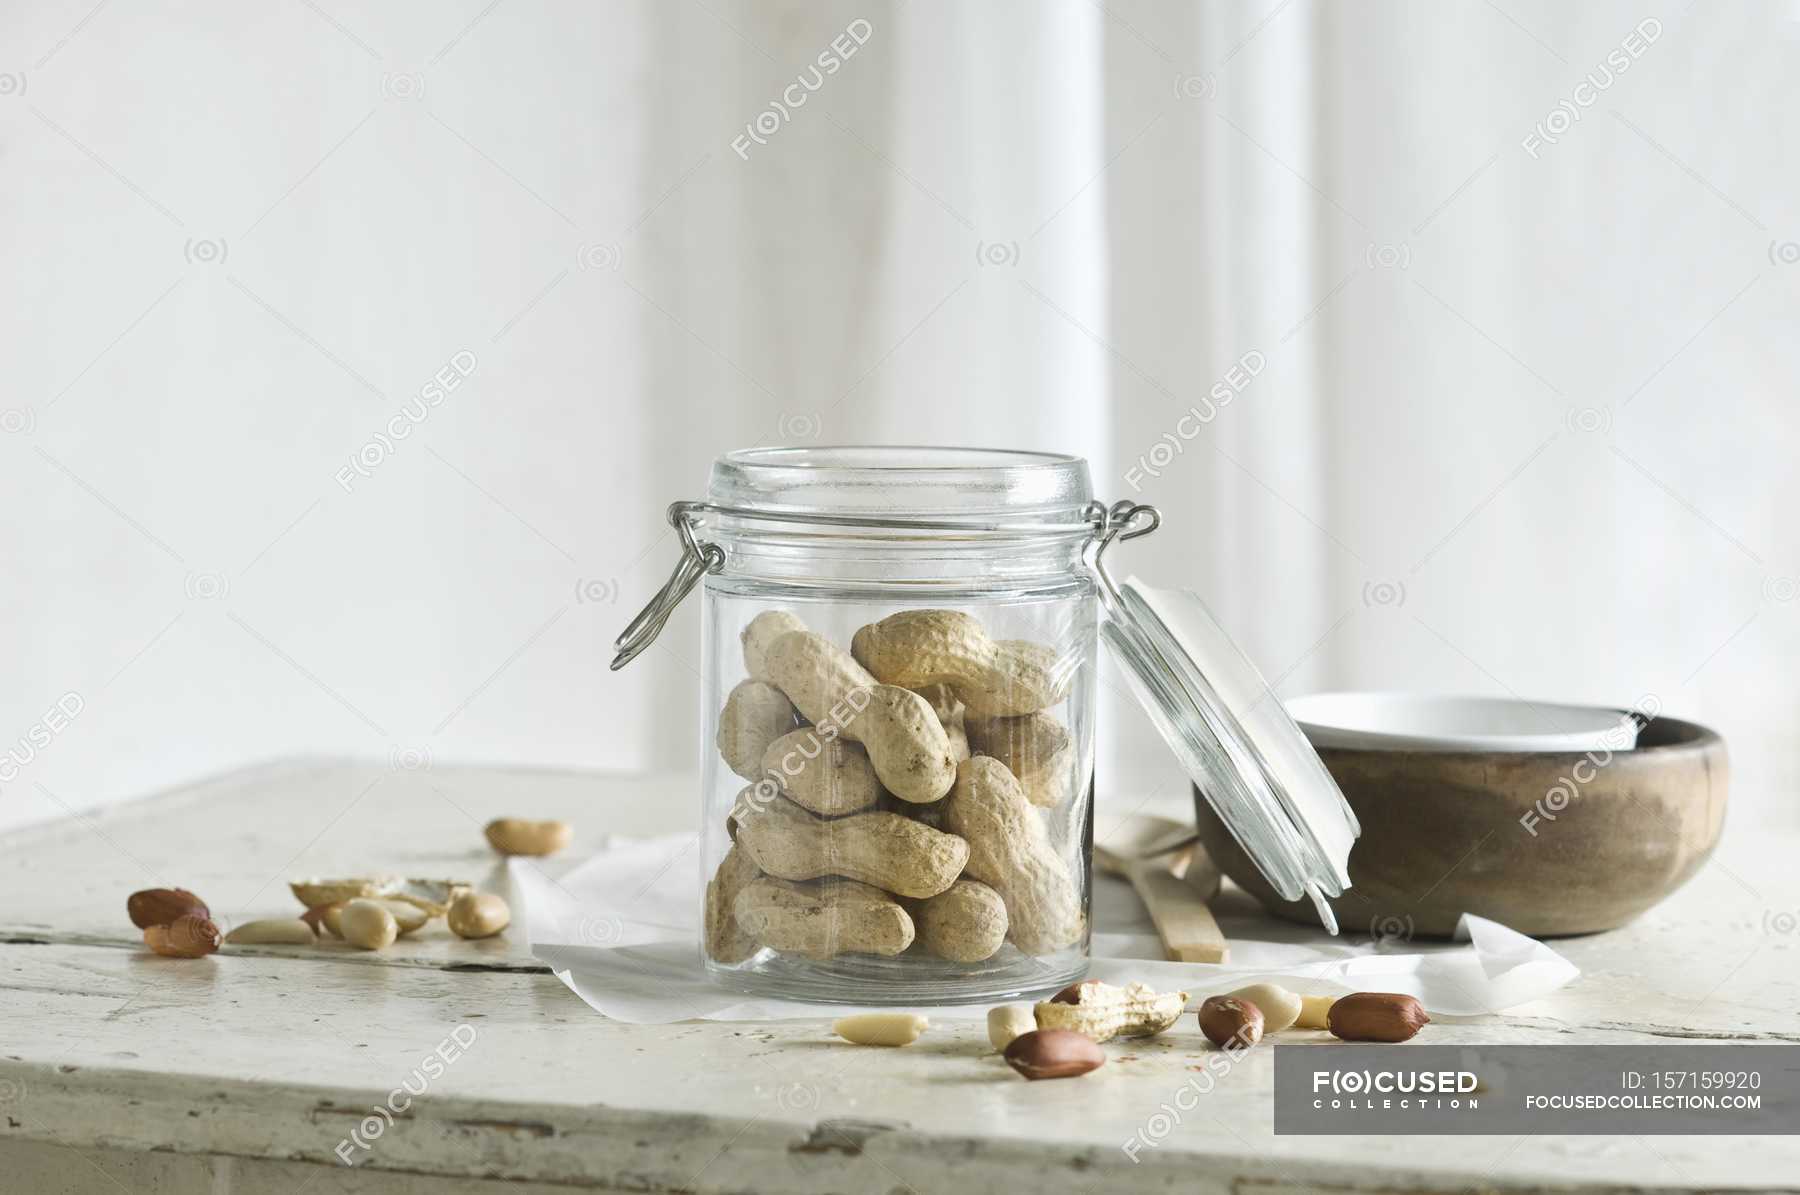 Peanuts In And Next To A Glass Jar On A Rustic Kitchen Table Food Delicious Stock Photo 157159920